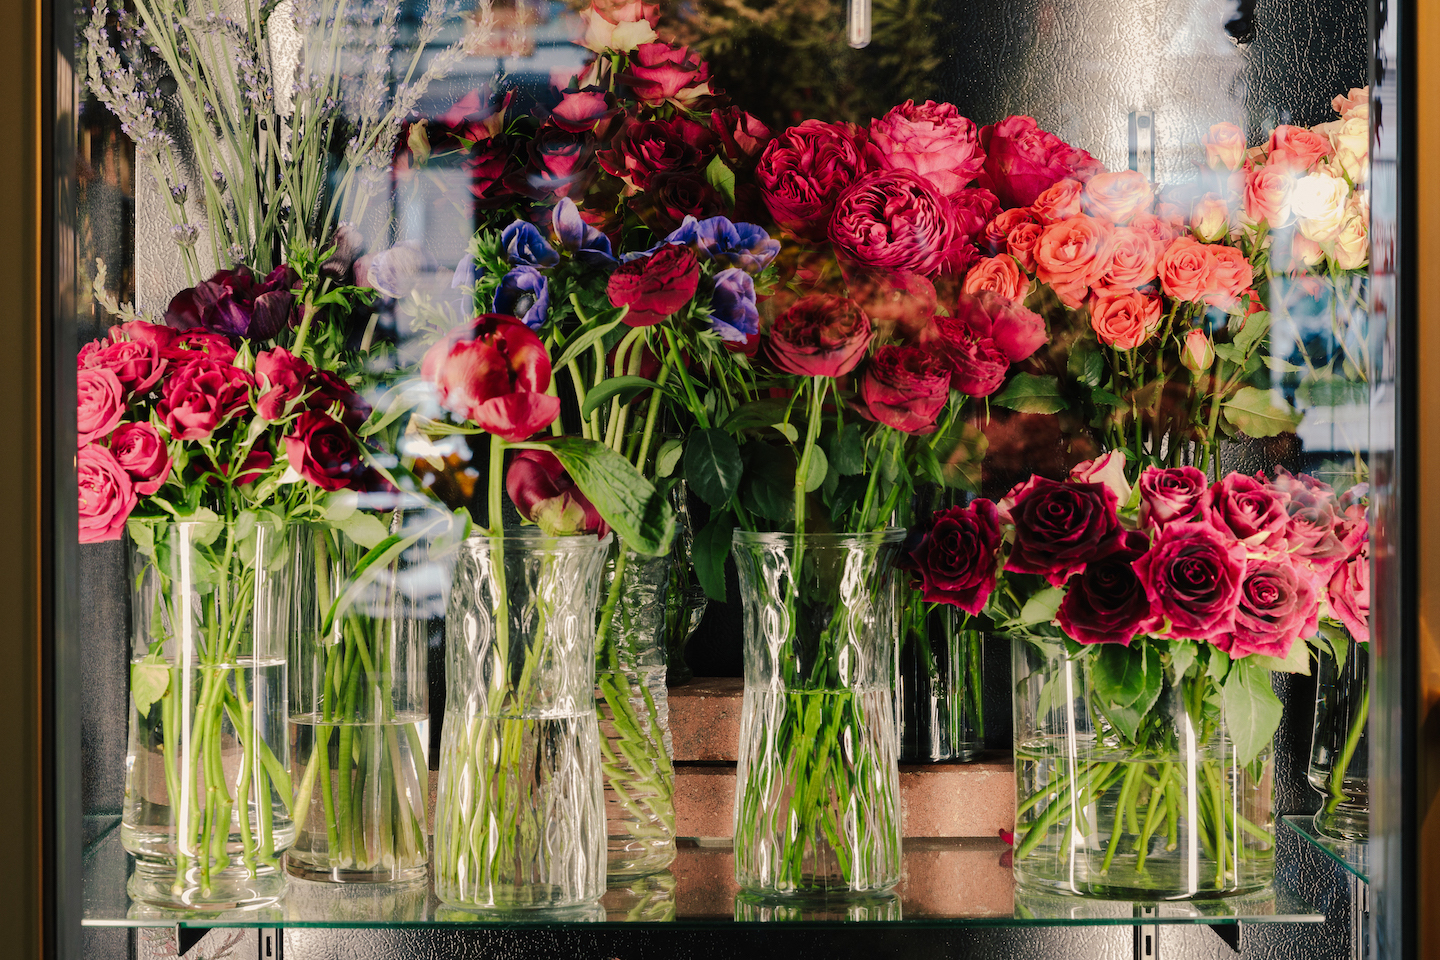 24 of the Best Wedding Florists in Chicago, IL